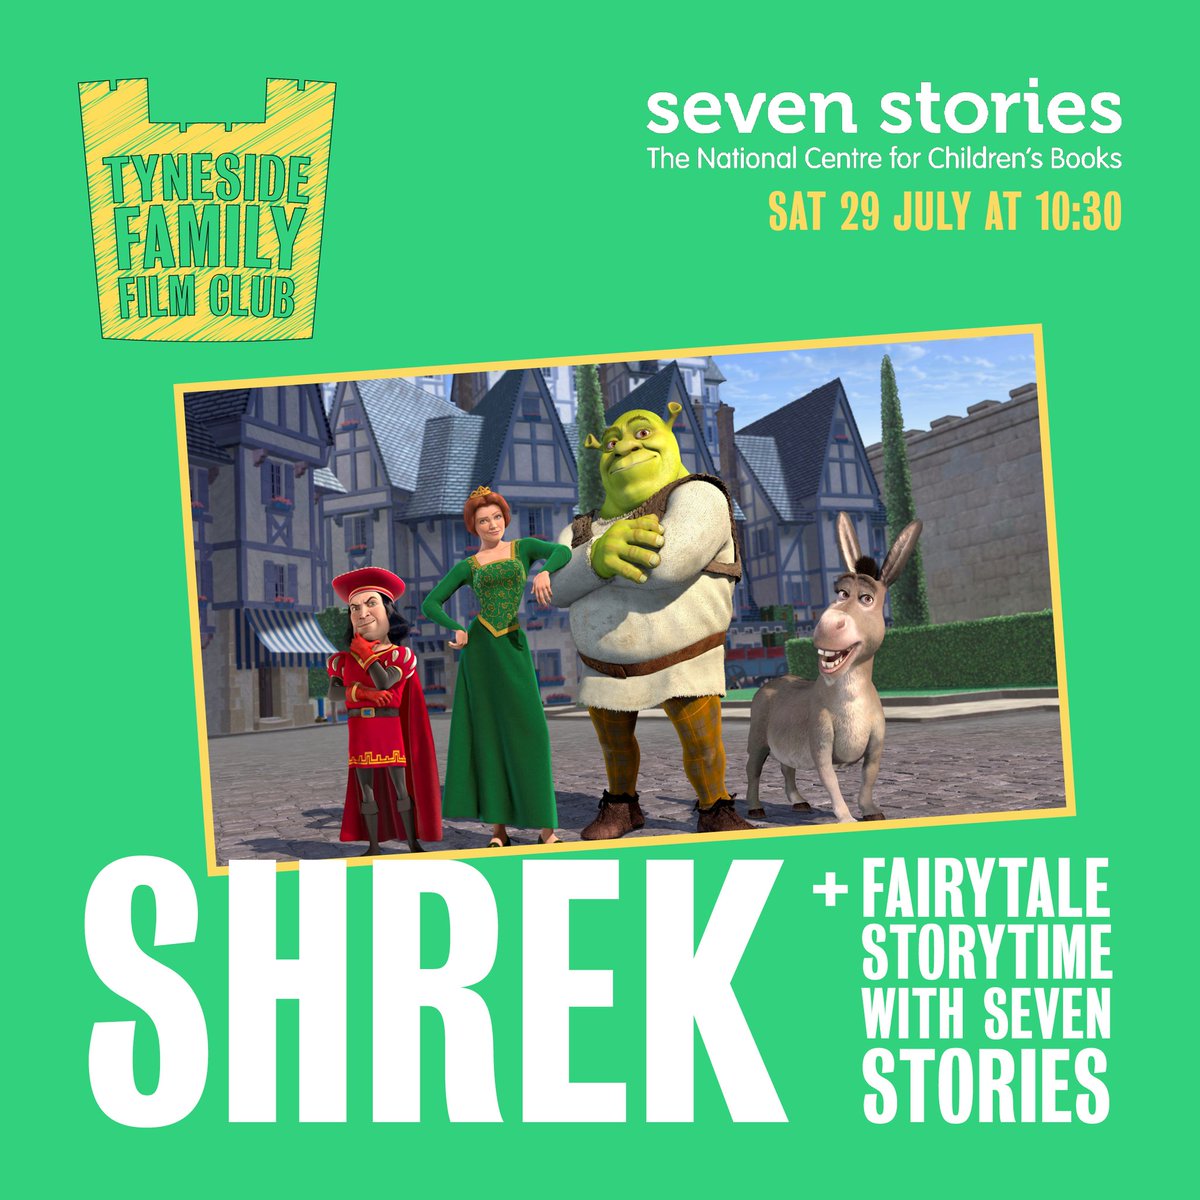 Dress up as your favourite fairy tale character and escape to the swamp of the loveable, multi-layered ogre Shrek, with a family screening of the beloved 2001 animated classic. This will be followed by Storytime and a mini book fair from our friends at @7Stories Book now! 🎟️